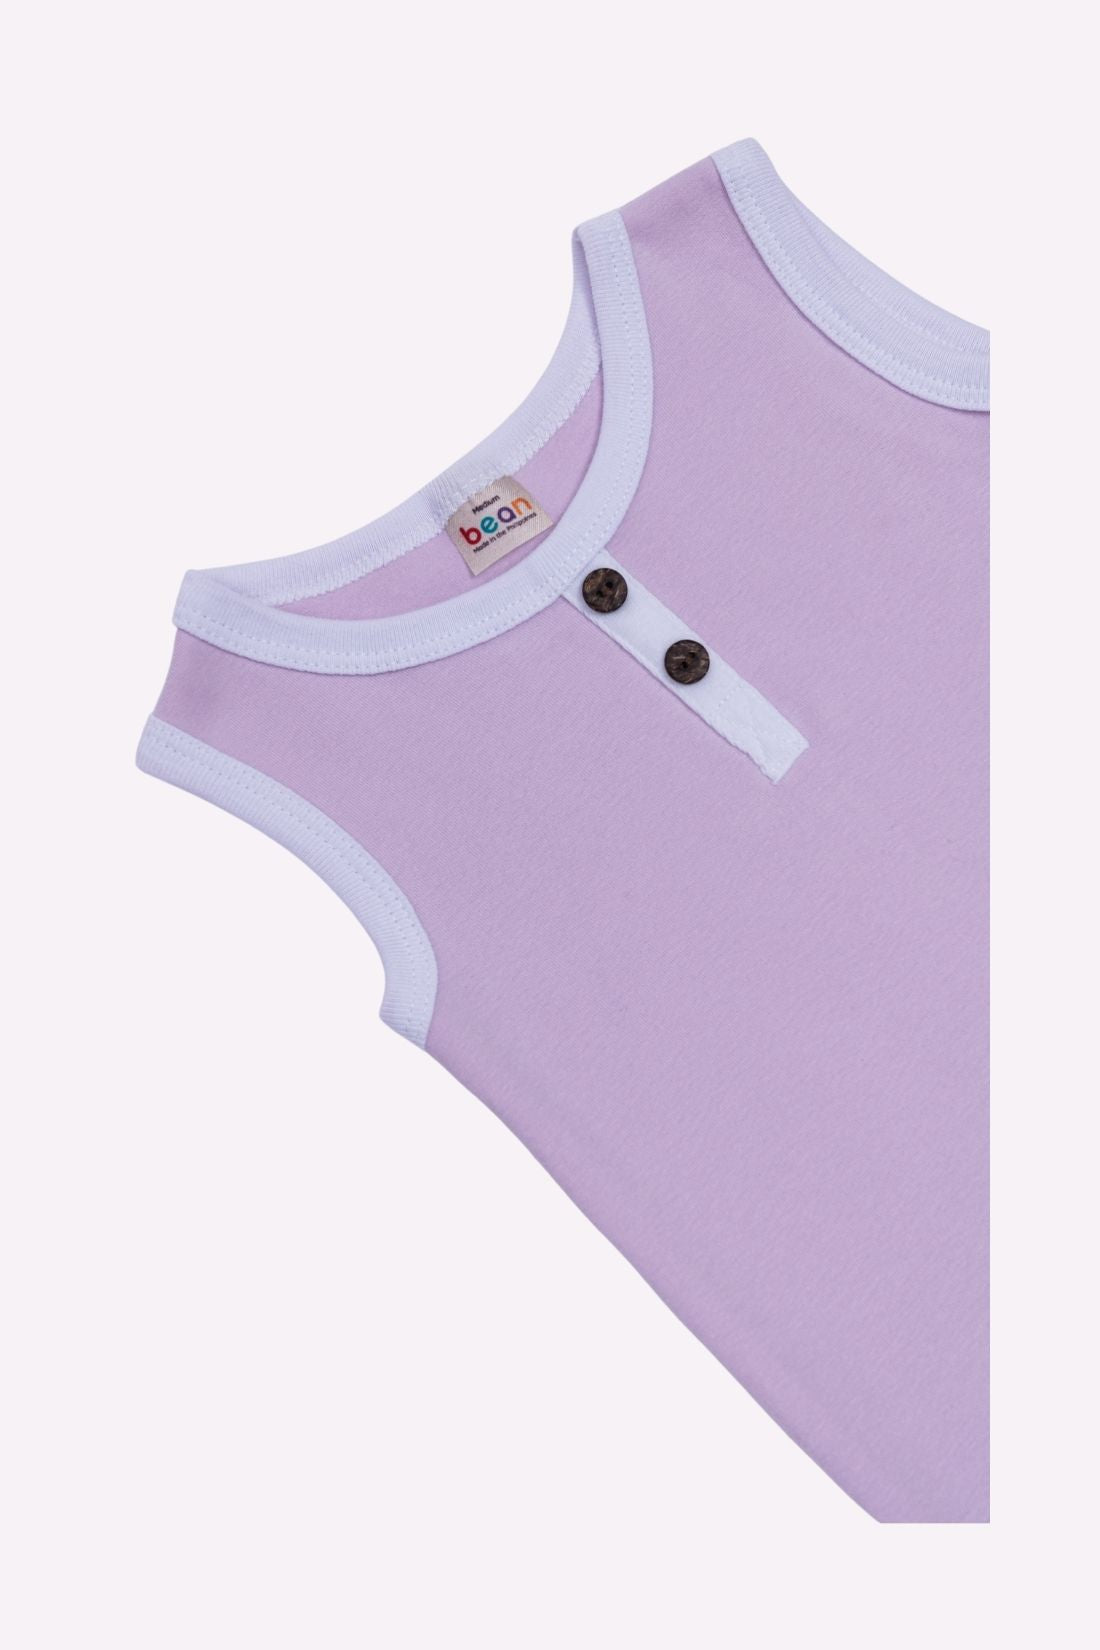 Comfy Casuals Play Sleeveless Onesie